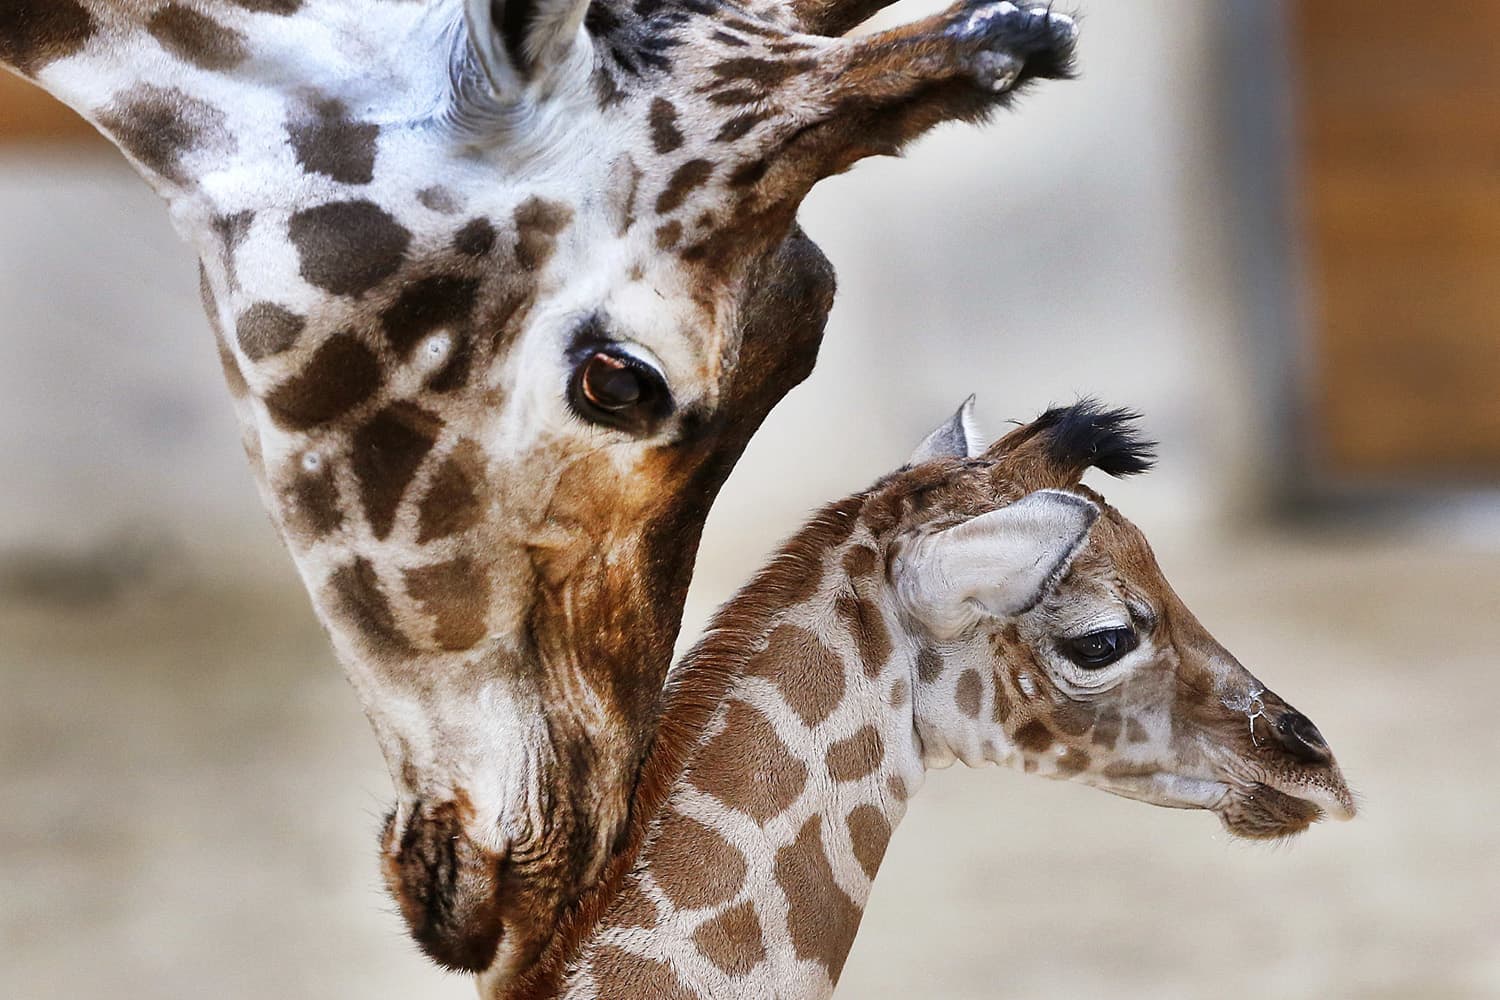 Three-days-old giraffe baby Kimara is touched by its mother Katharina during its first way out in the Opel zoo in Kronberg near Frankfurt, Germany. (Michael Probst/AP)